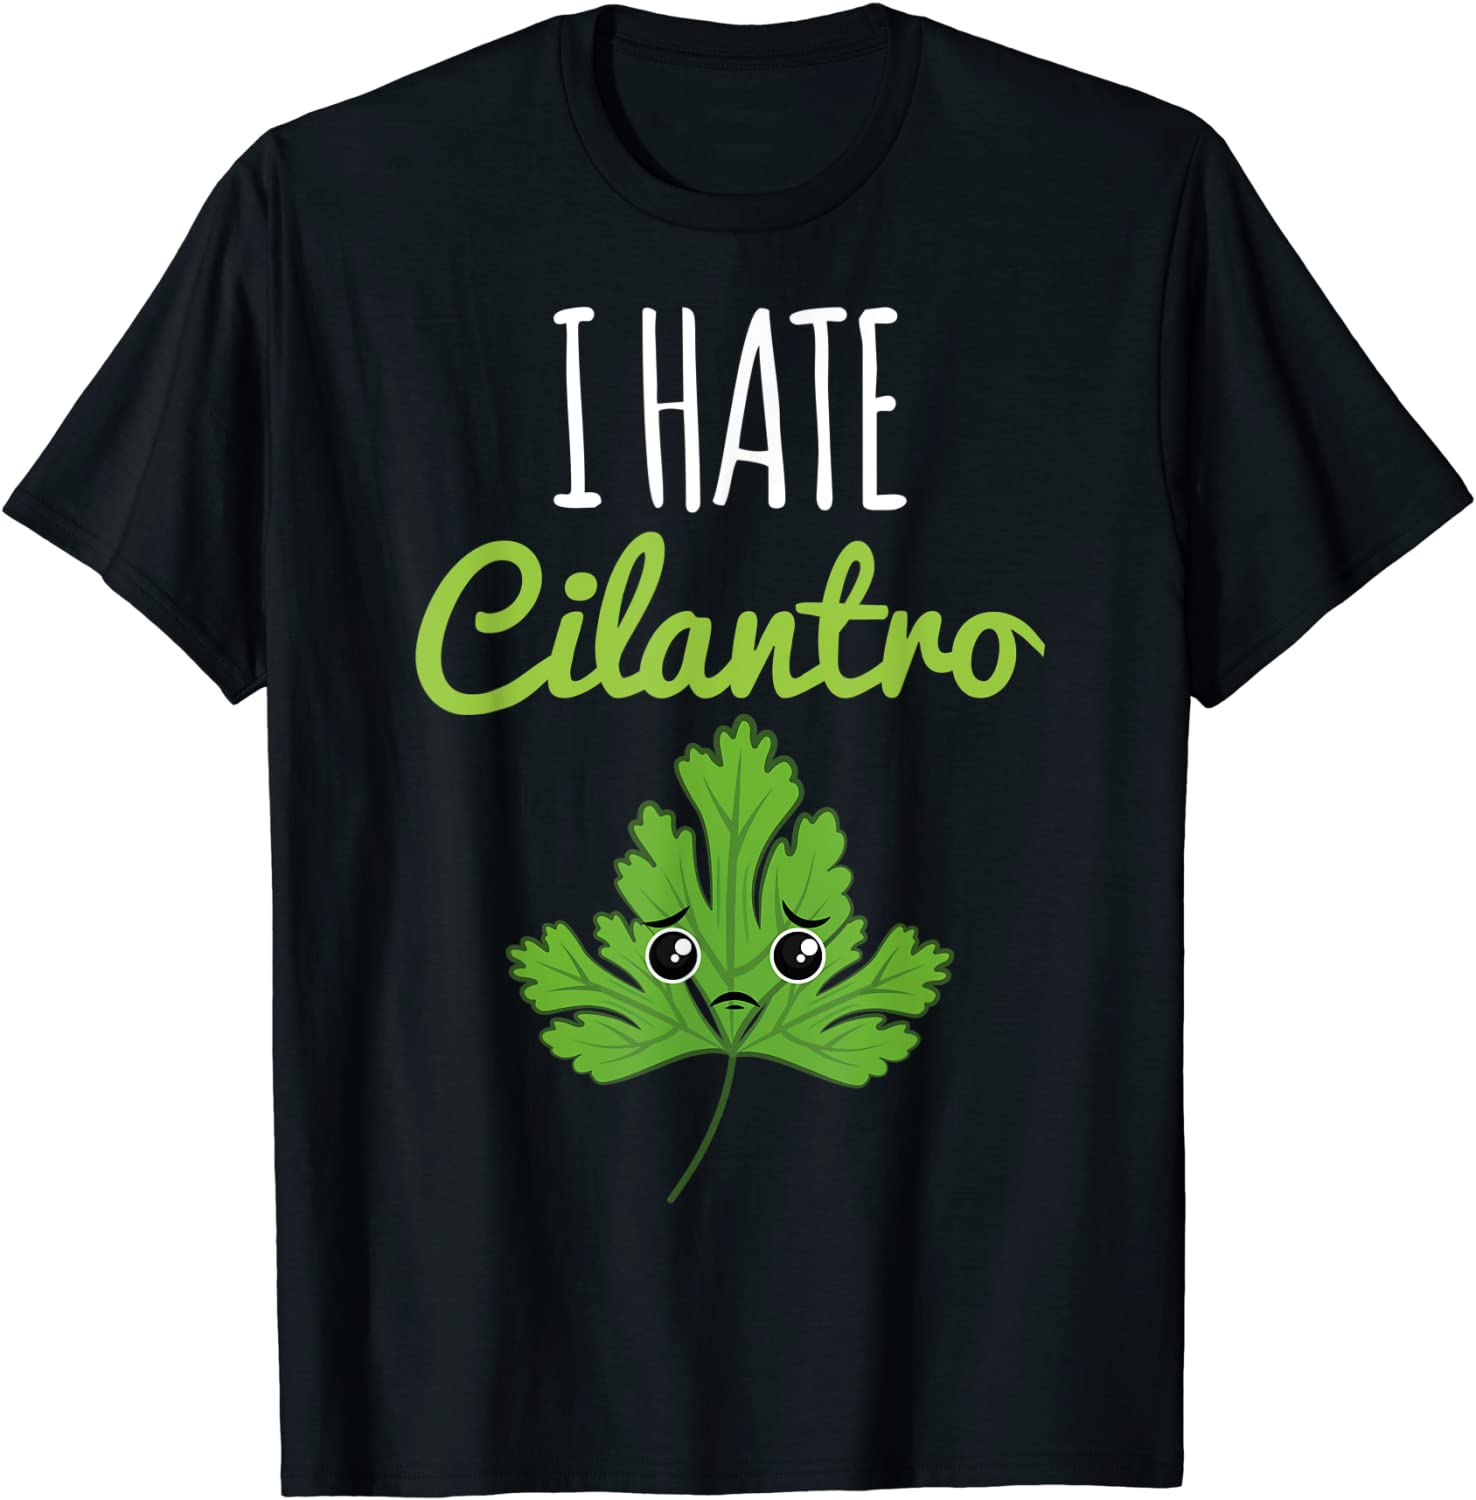 I'm Confused...I Just Assumed EVERYONE Loves Cilantro because I LOVE ...